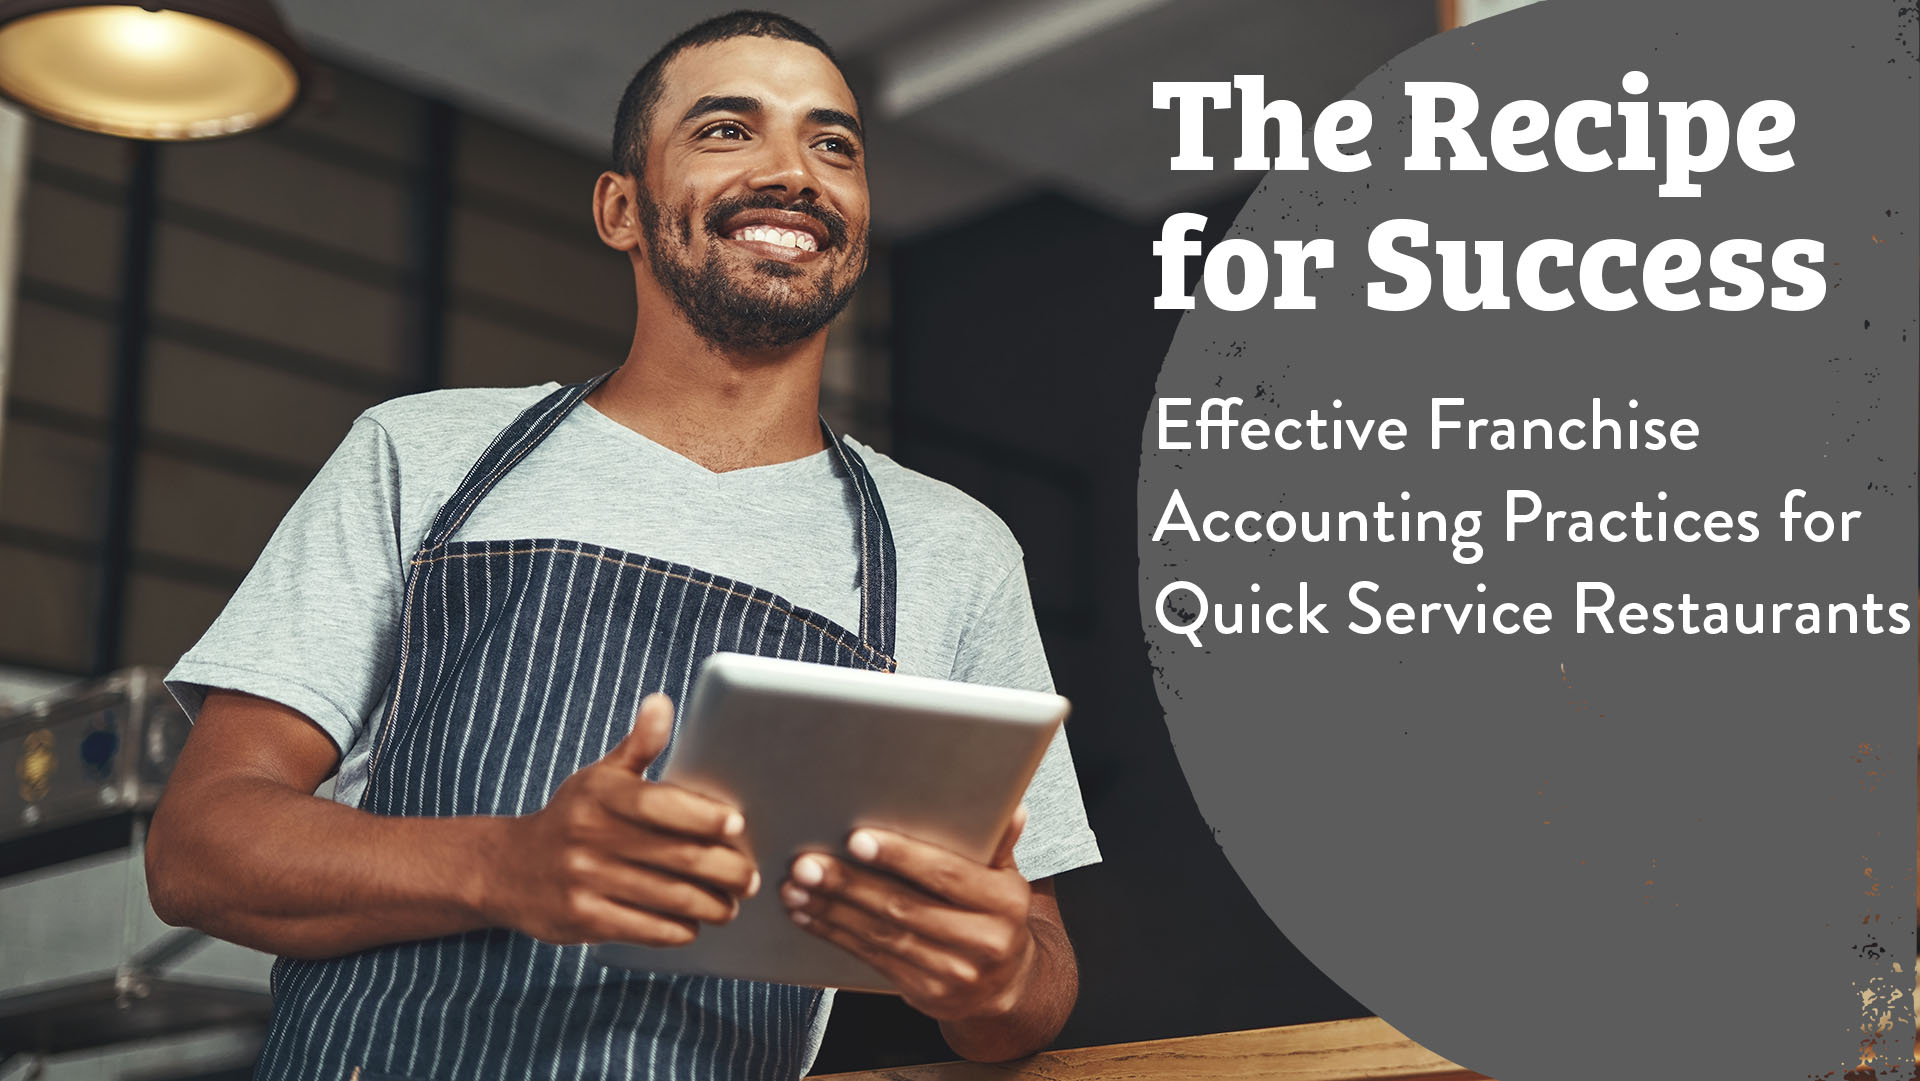 The Recipe for Success: Effective Franchise Accounting Practices for Quick Service Restaurants